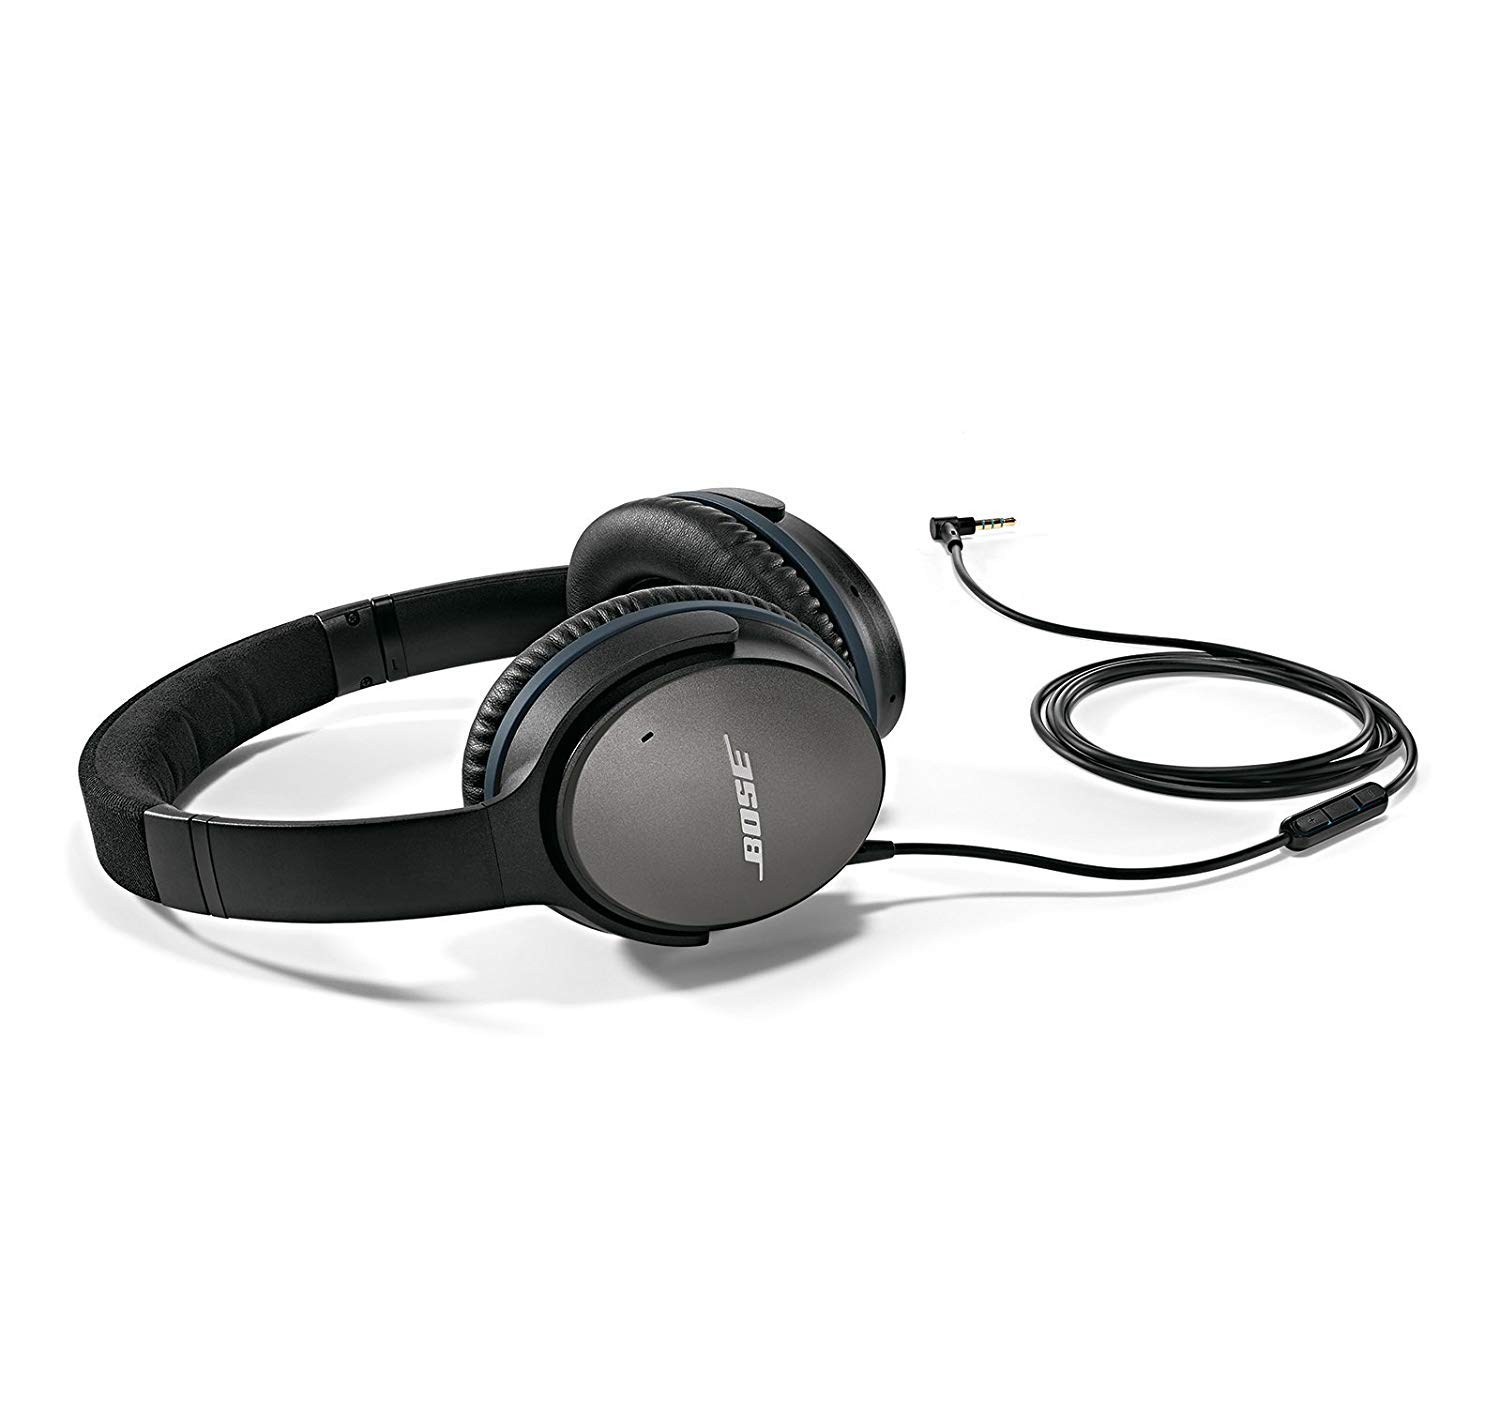 QC25 noise cancelling headphones - Samsung/Android™ devices